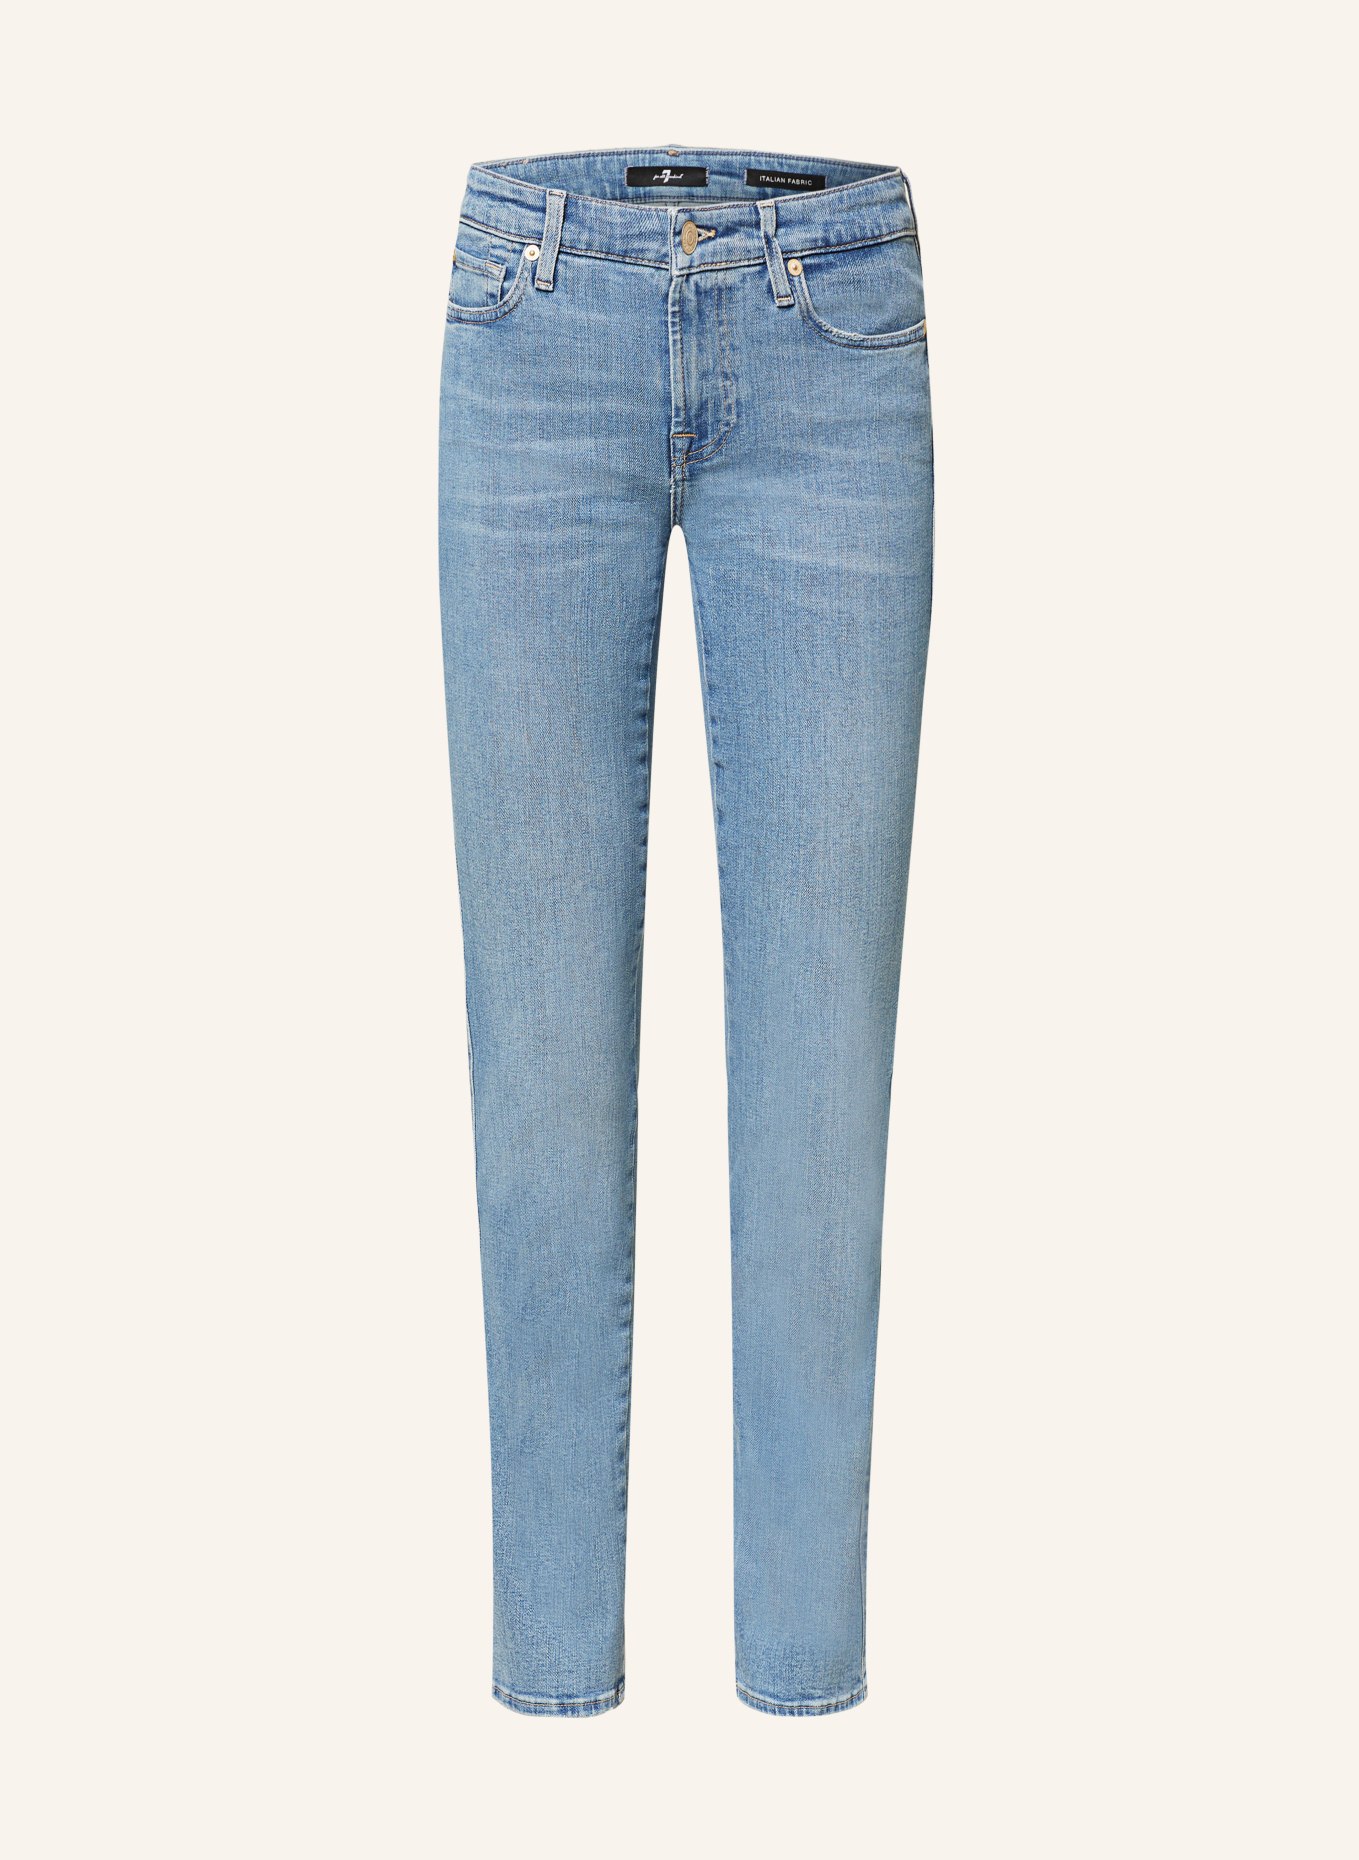 7 for all mankind Straight Jeans KIMMIE, Farbe: LIGHT BLUE (Bild 1)